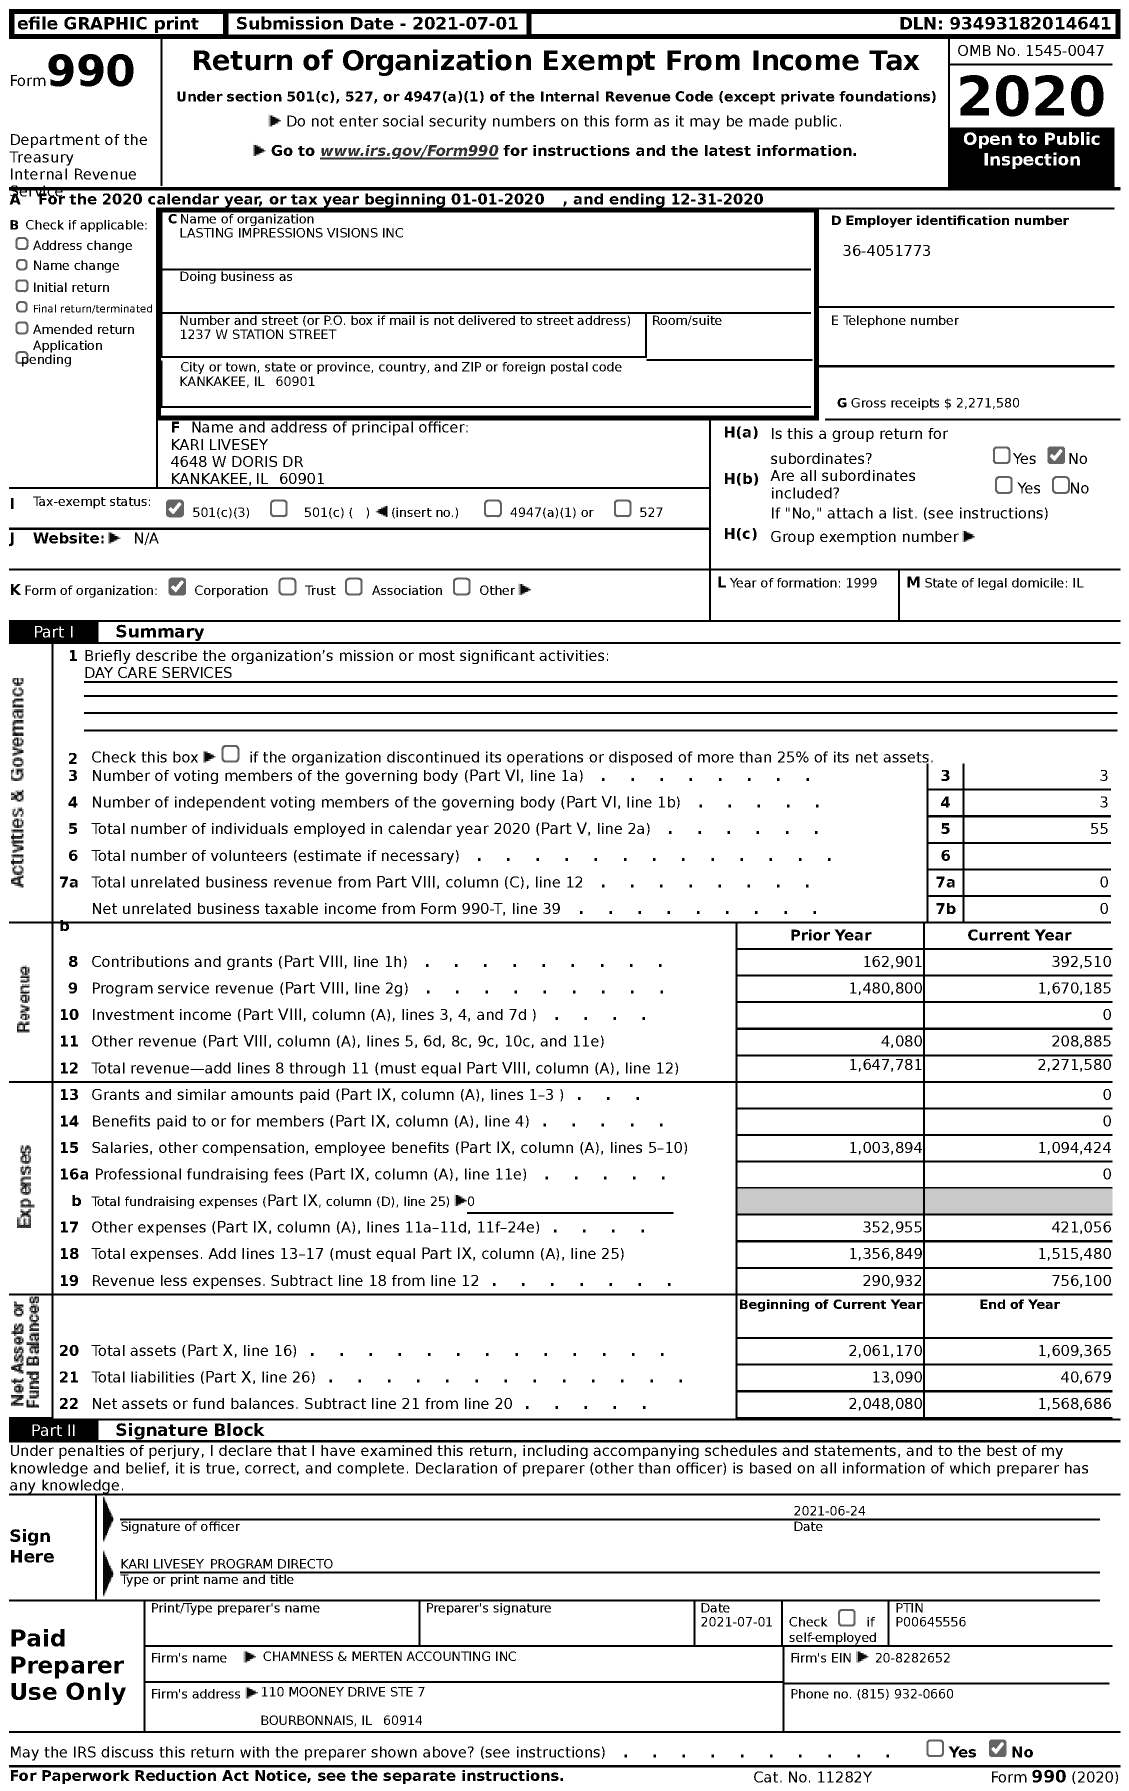 Image of first page of 2020 Form 990 for Lasting Impressions Visions